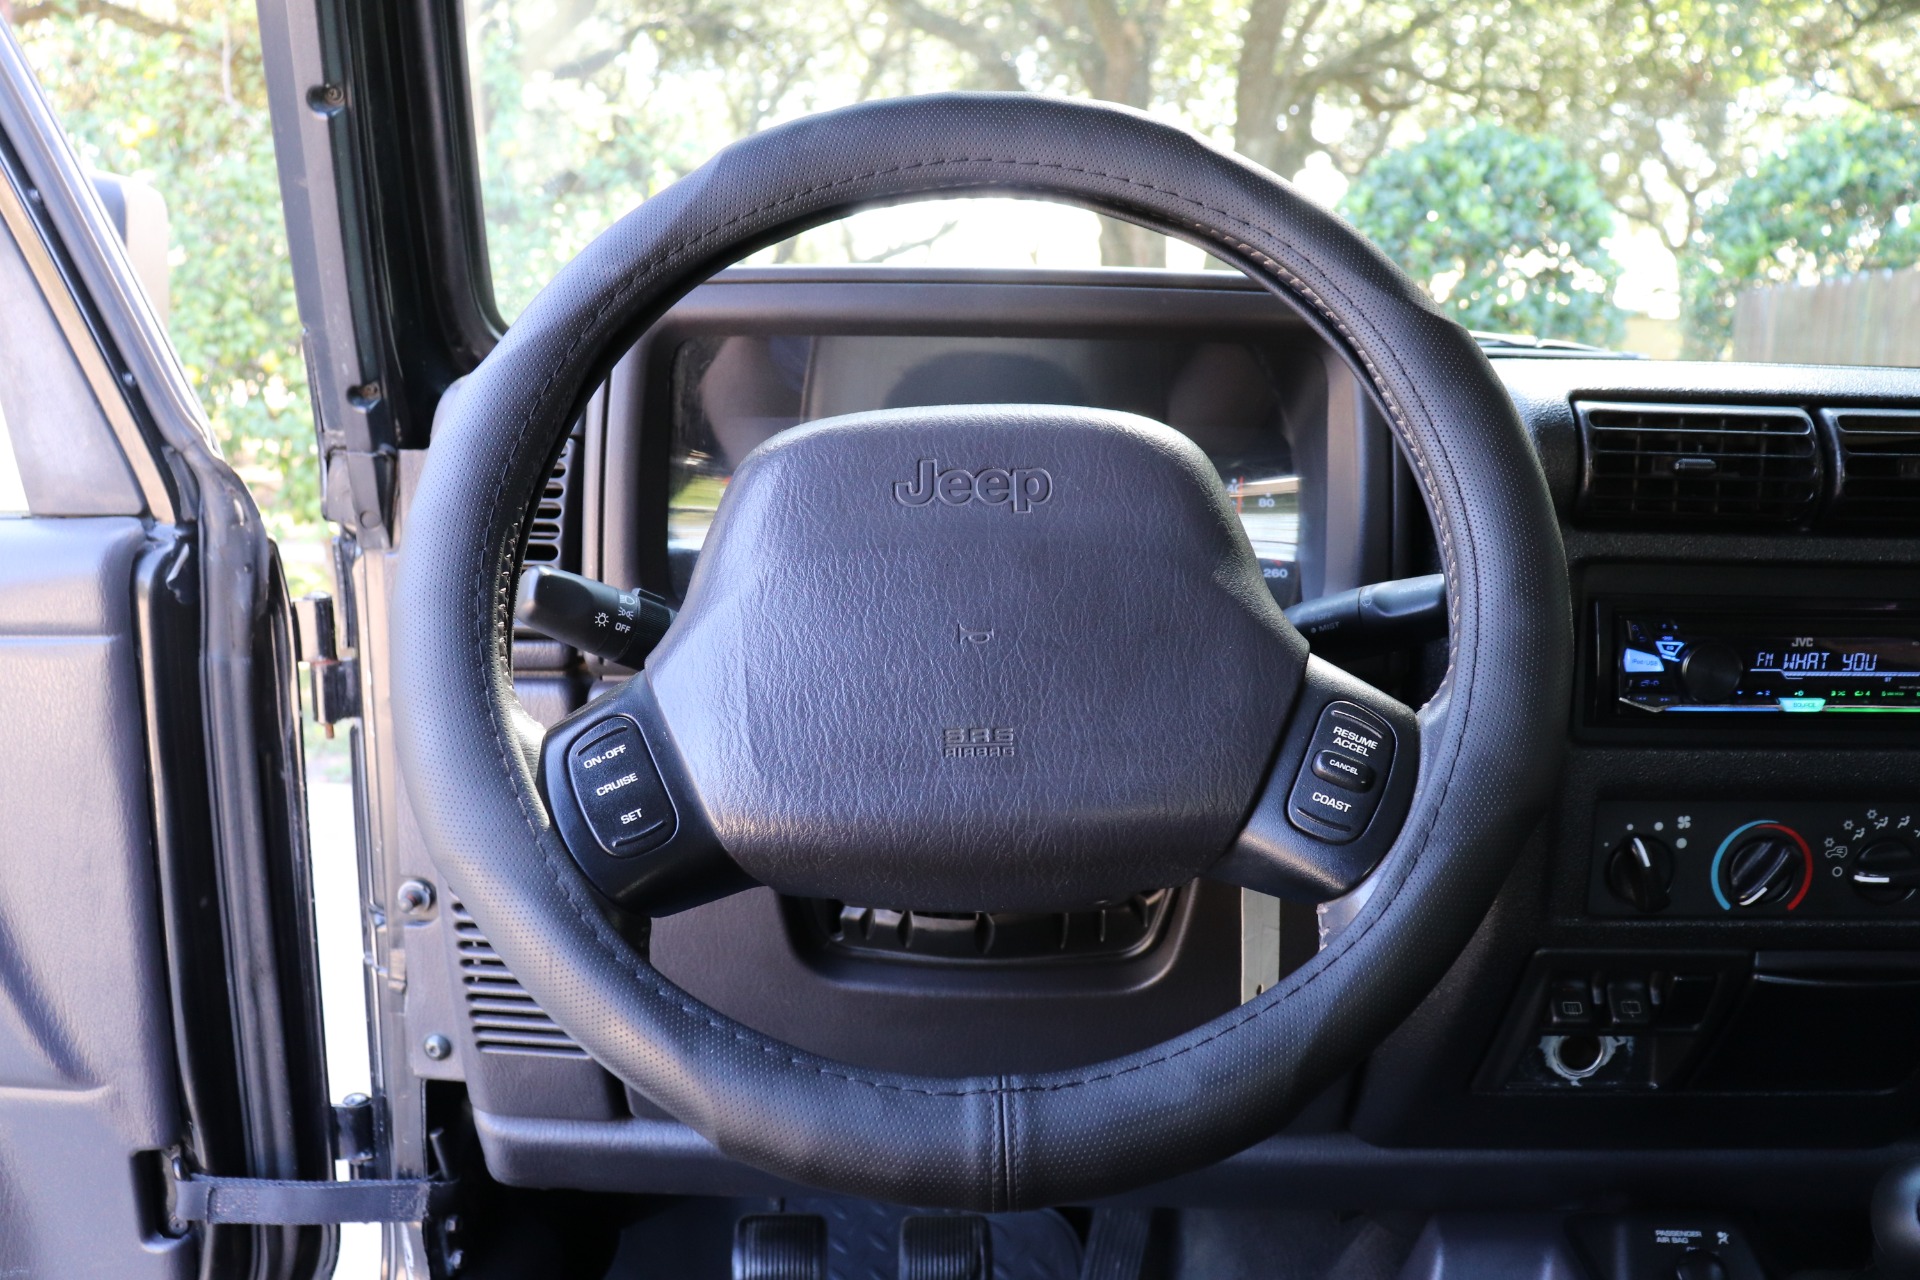 Used 2001 Jeep Wrangler Sport For Sale ($12,995) | Select Jeeps Inc. Stock  #338237